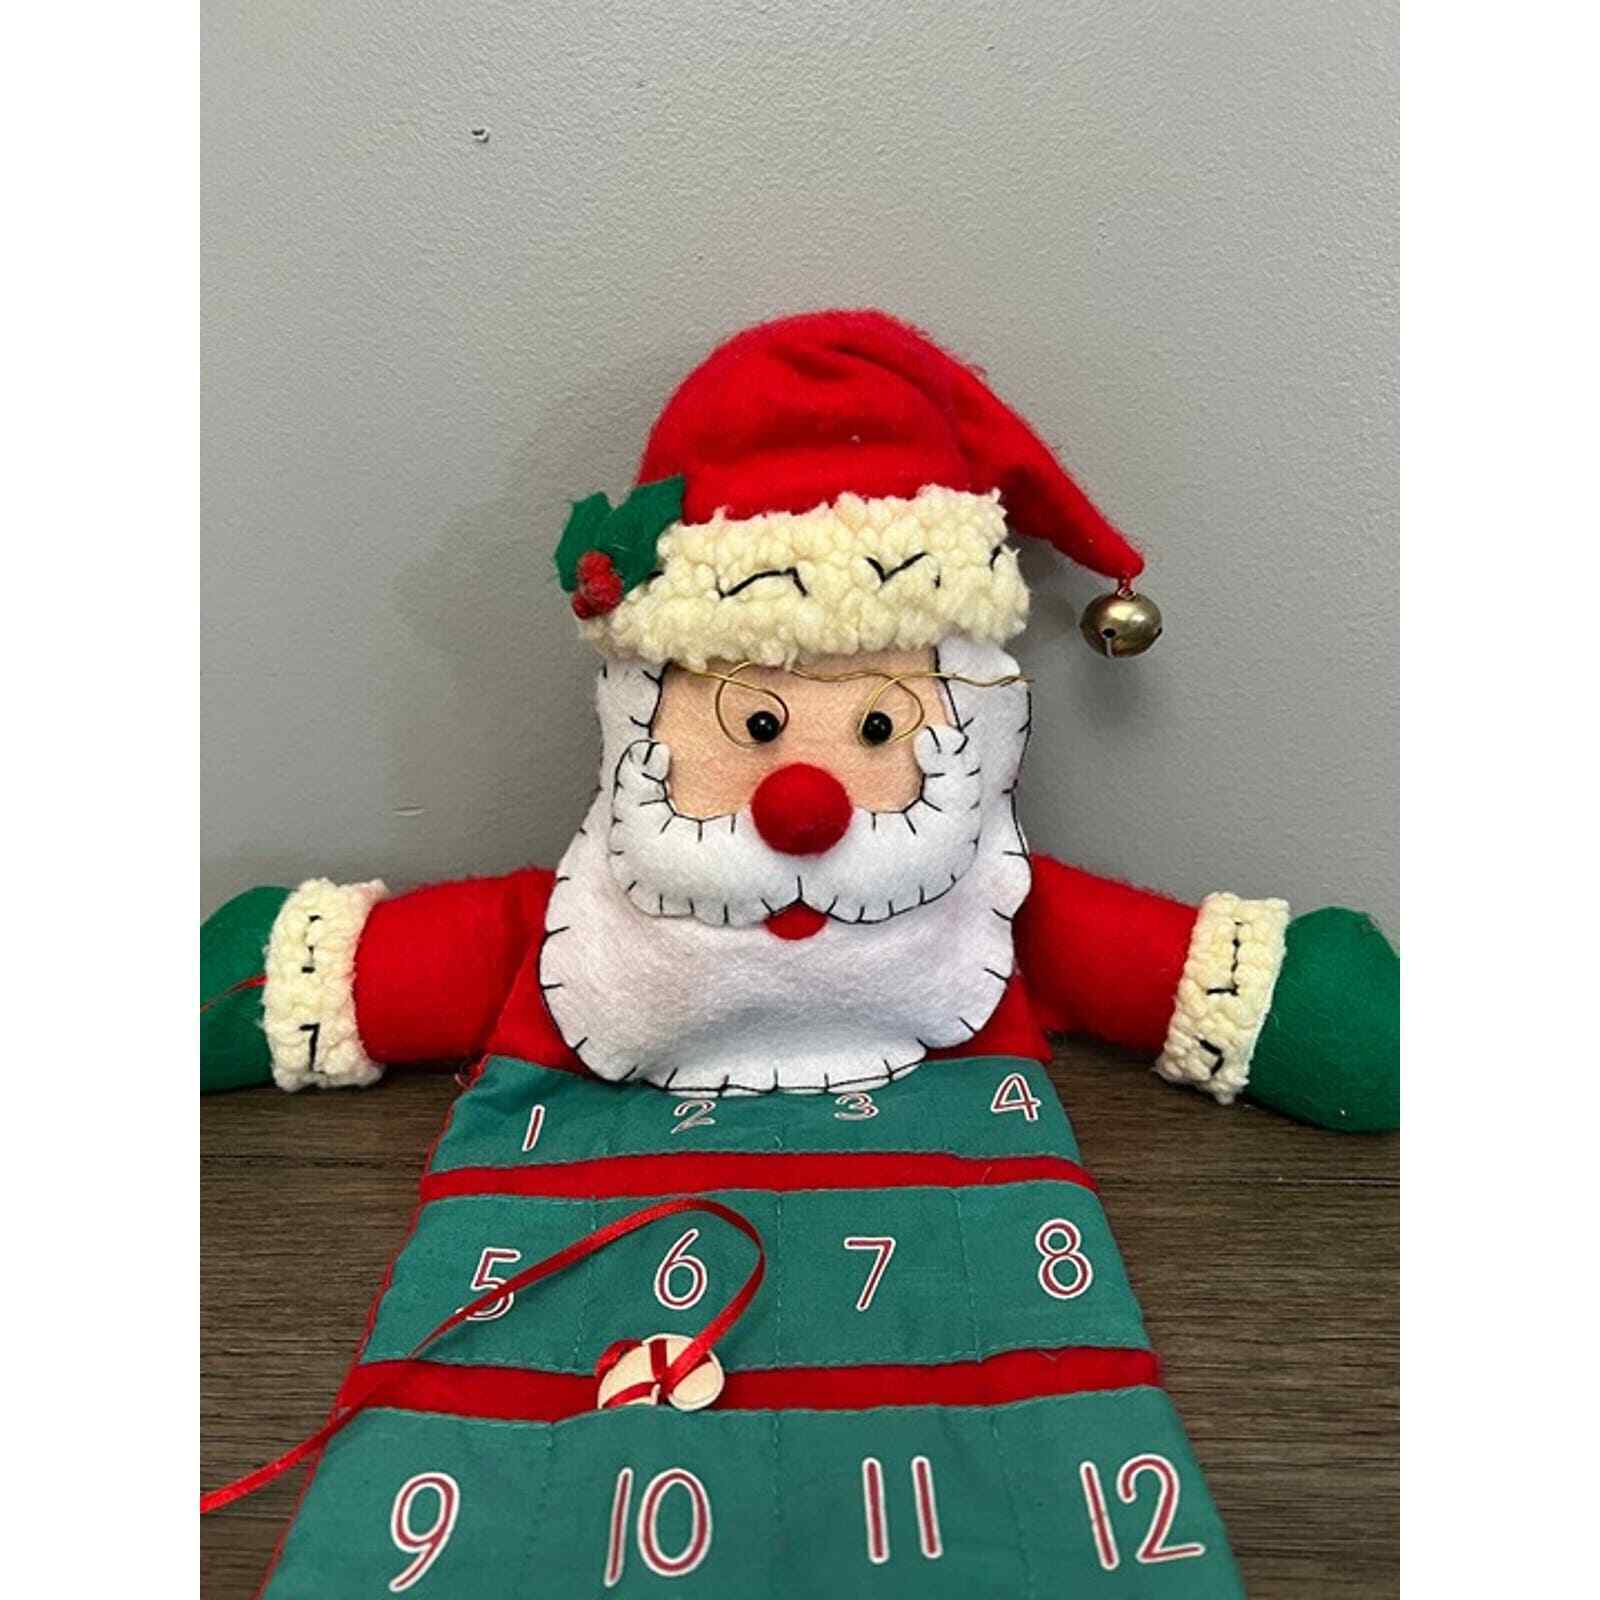 Santa Clause Advent Countdown Wall Calendar with Candy Cane Marker